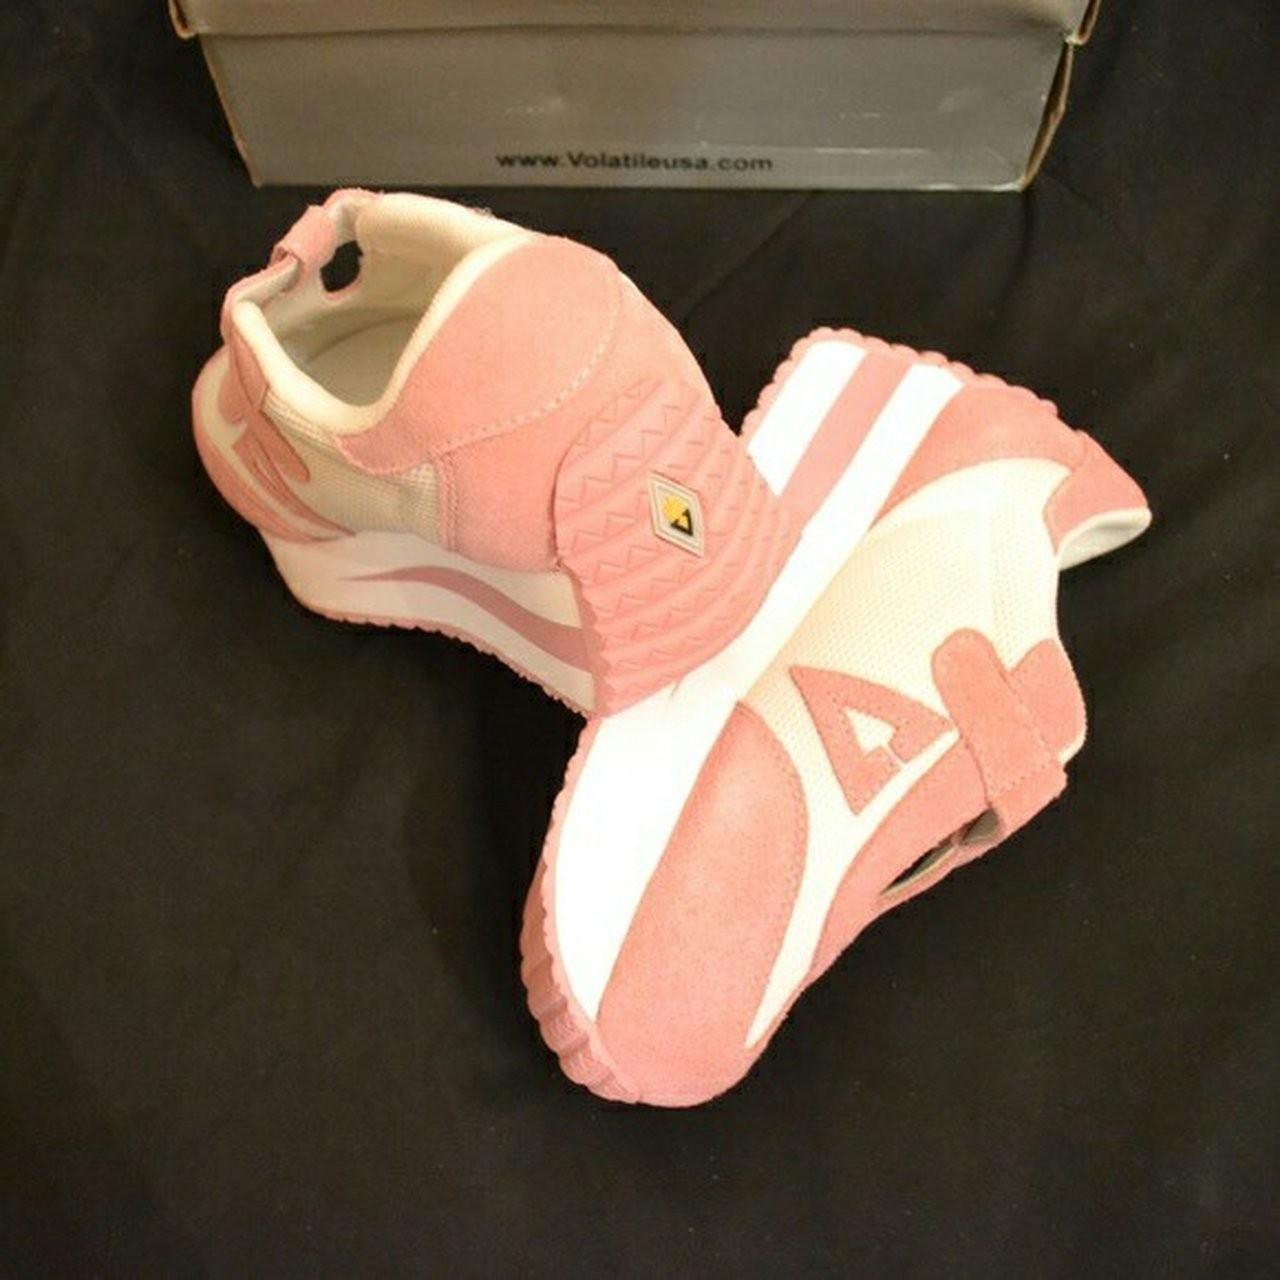 Product Image 4 - VOLATILE Competition Pink/White Platform Shoes